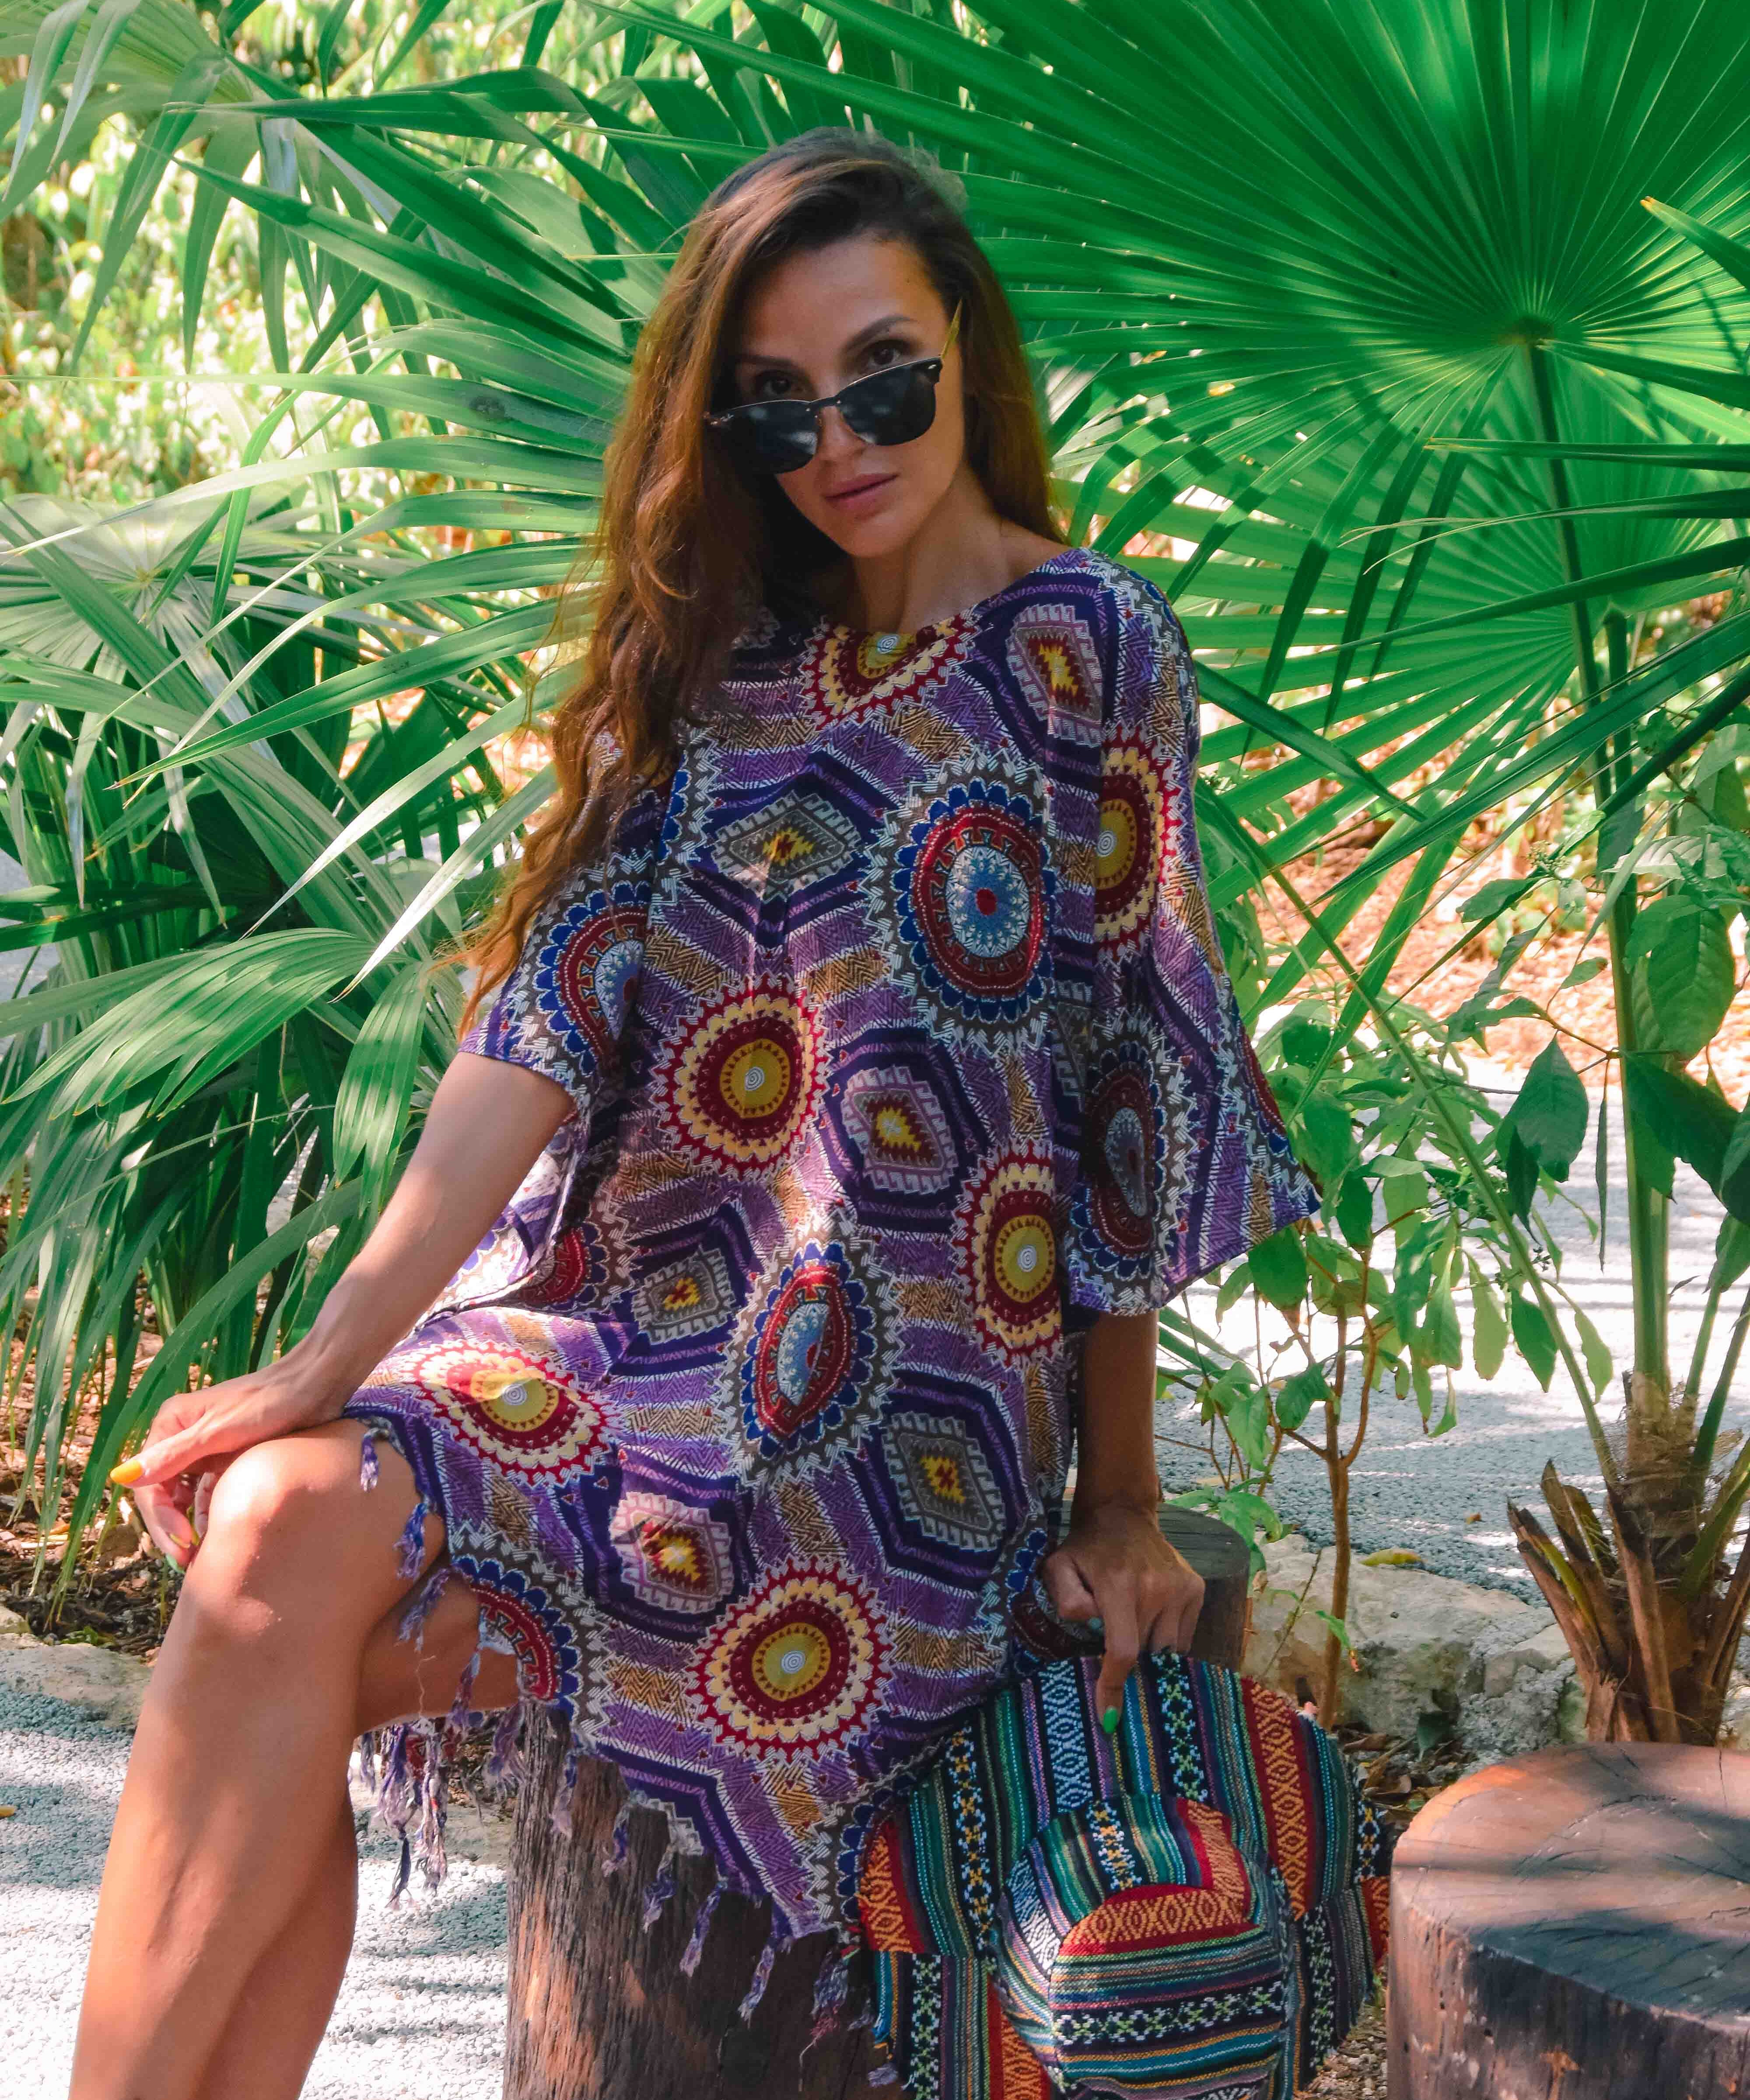 AZTEK PONCHO Elepanta Ponchos - Buy Today Elephant Pants Jewelry And Bohemian Clothes Handmade In Thailand Help To Save The Elephants FairTrade And Vegan